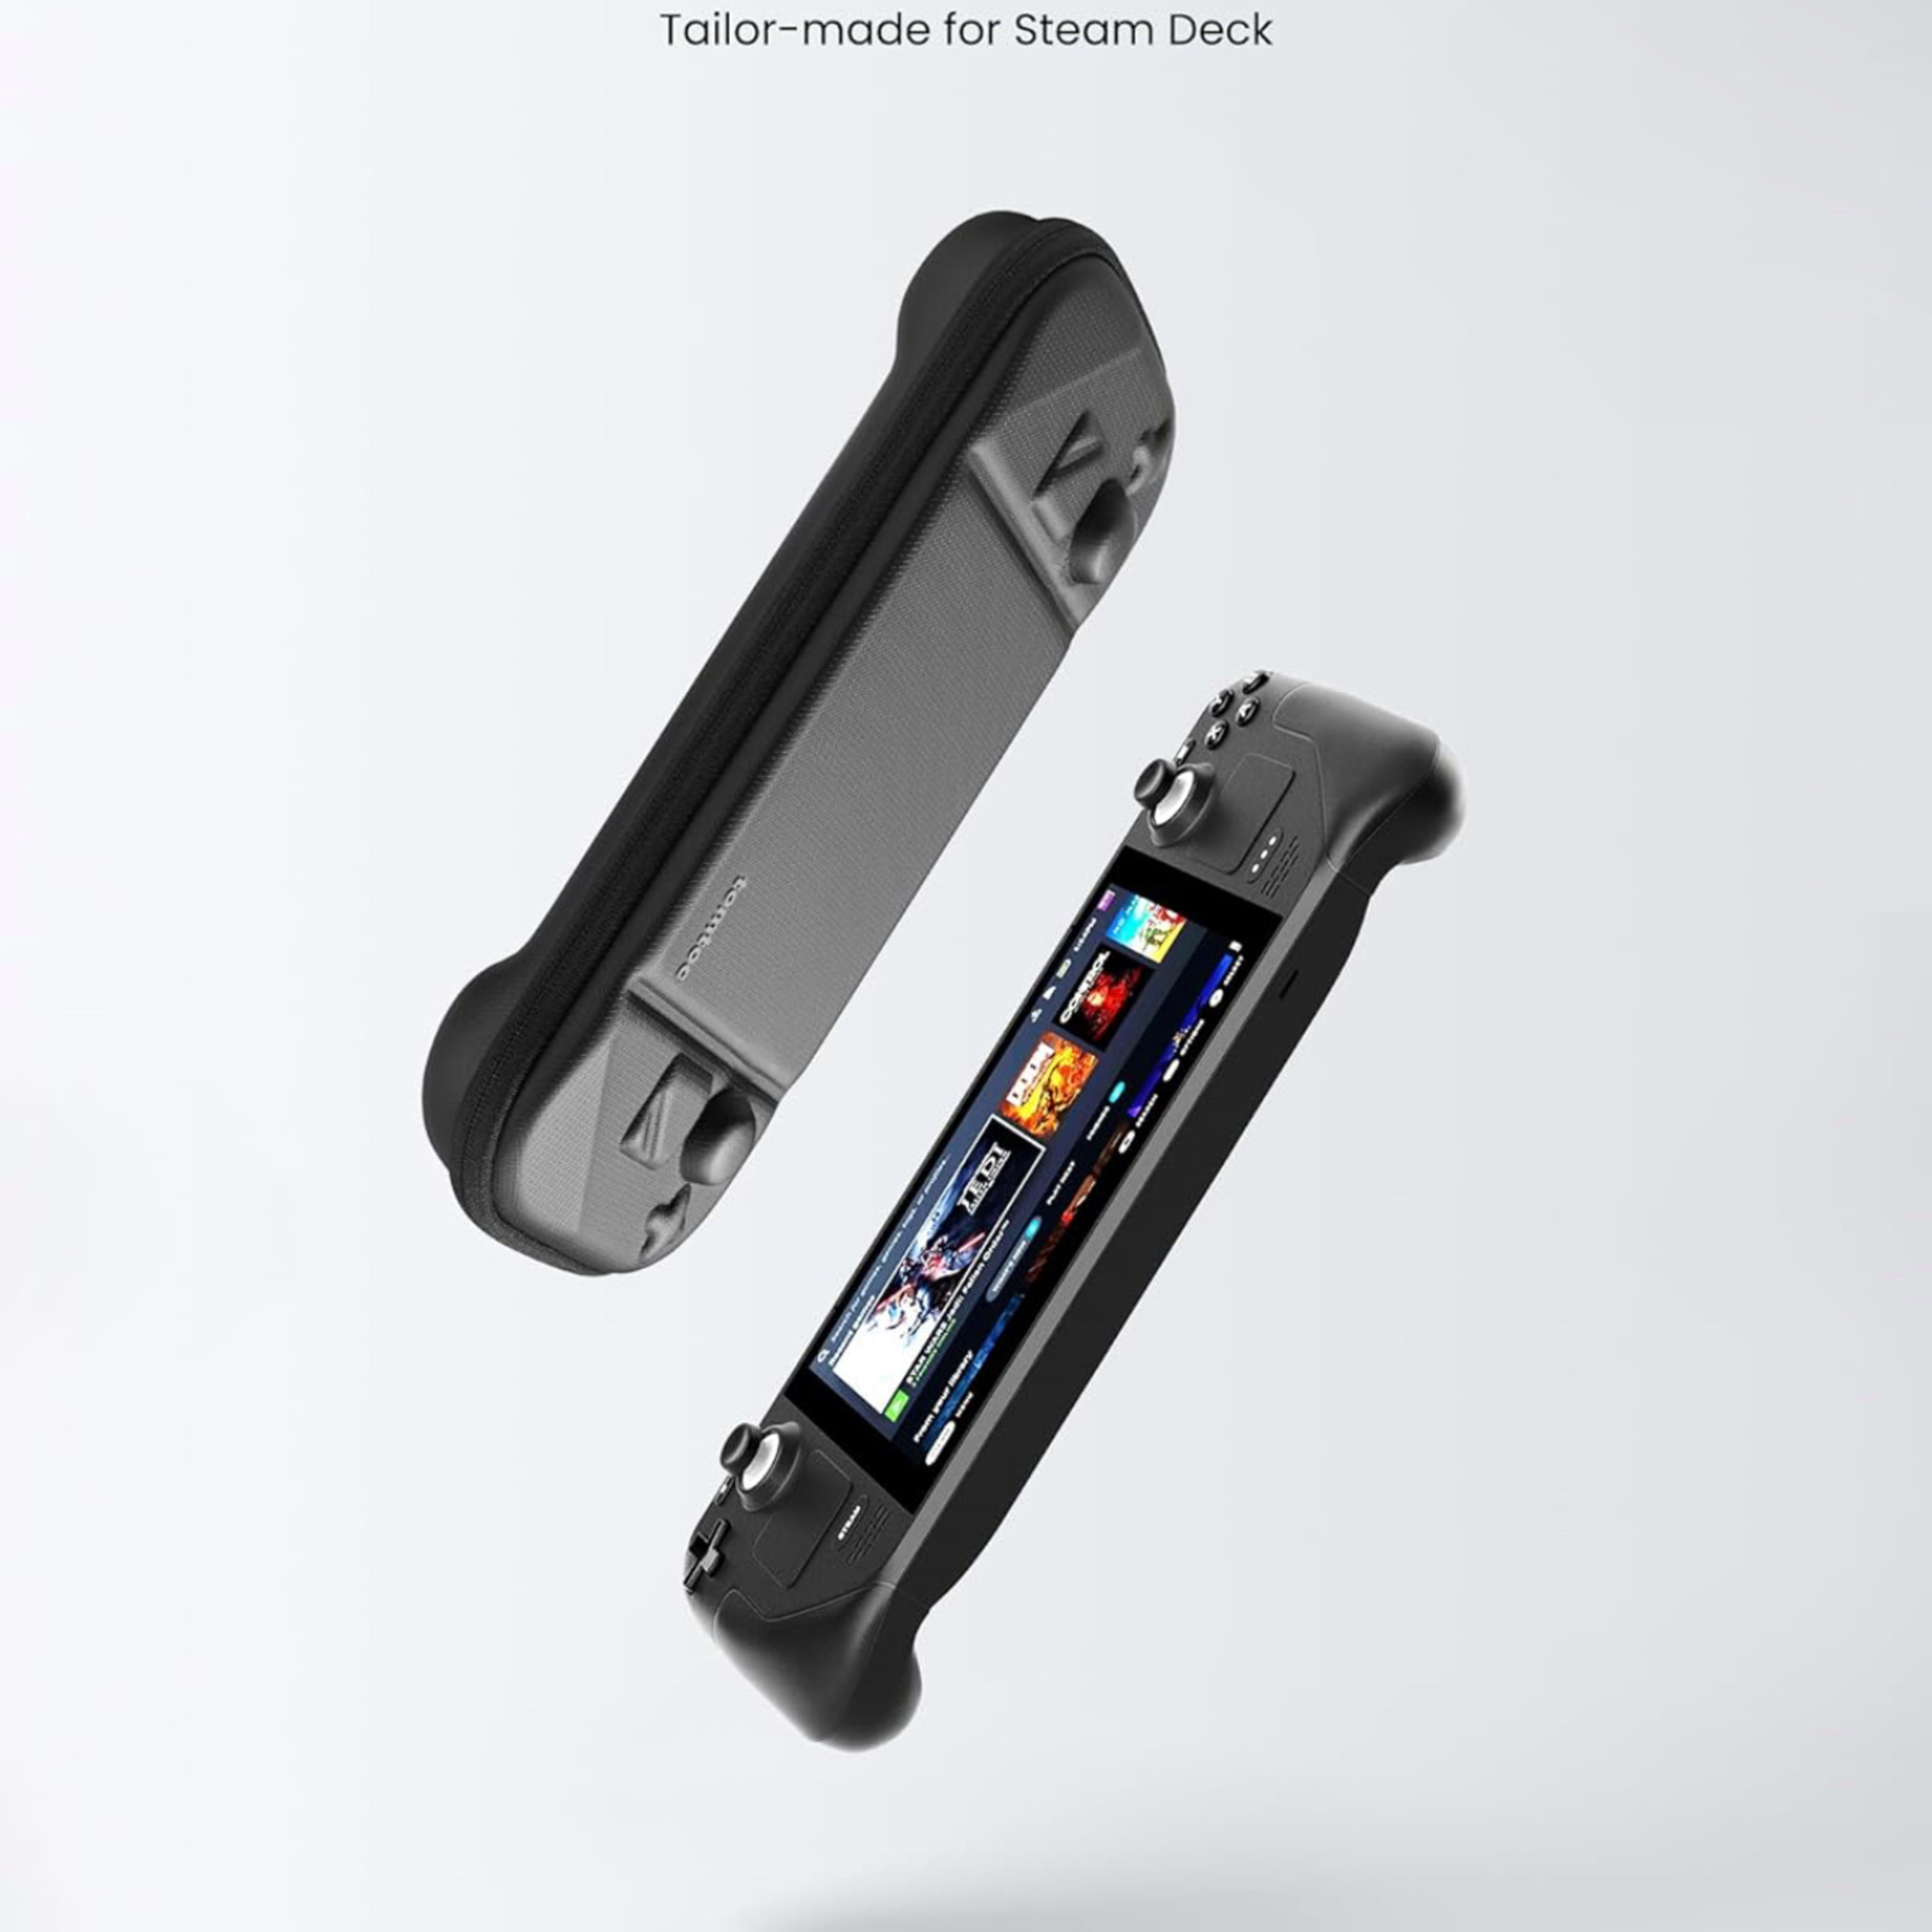 tomtoc Carrying Case Compatible with Steam Deck/Steam Deck OLED, Protective case